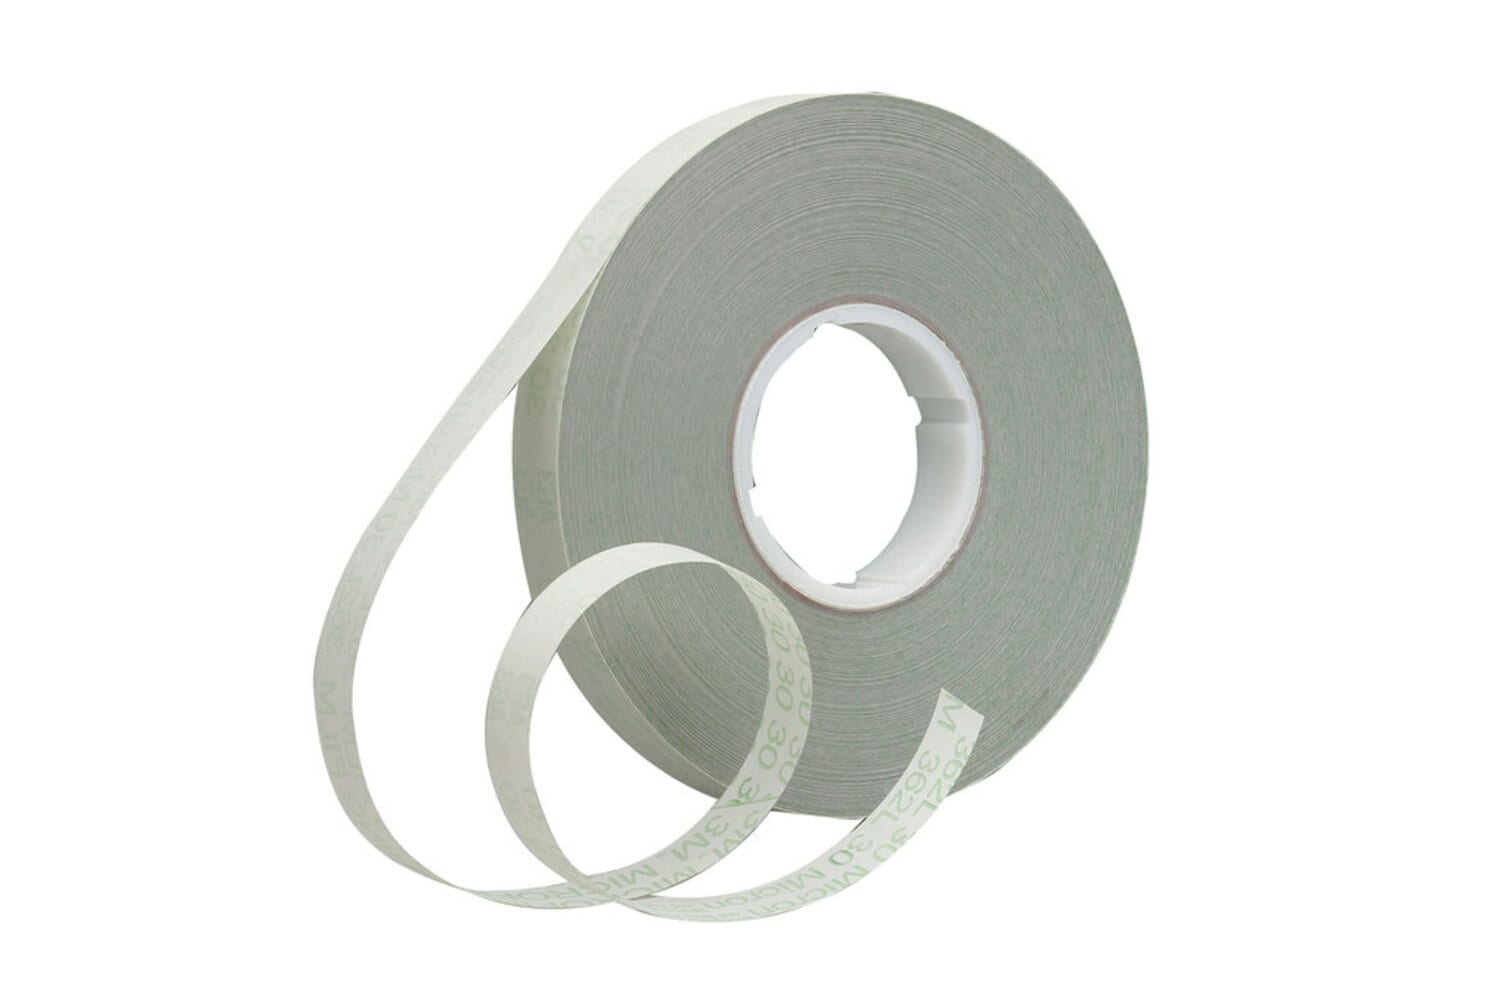 7010510136 - 3M Microfinishing Film Roll 362L, 50 Mic 3MIL, 1.969 in x 899 ft x 3 in
(50mmx274m), SP, ASO, Scallop Both 1/4 in x 1/4 in